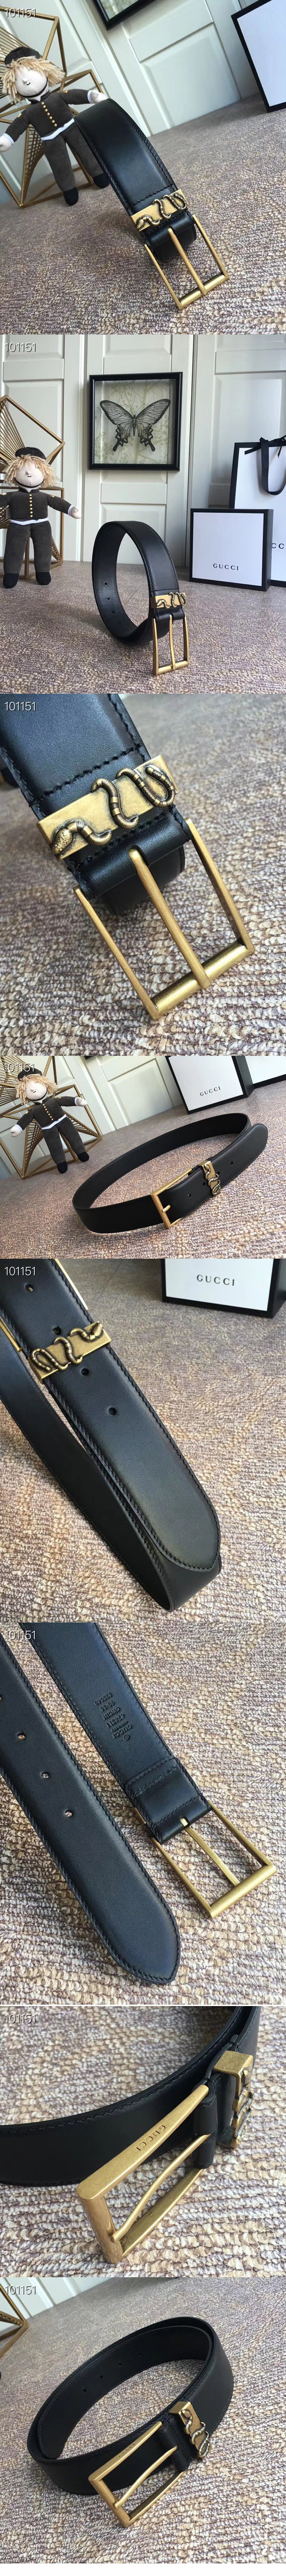 Replica Gucci 474811 4cm Leather belt Gold snake buckle in Black leather